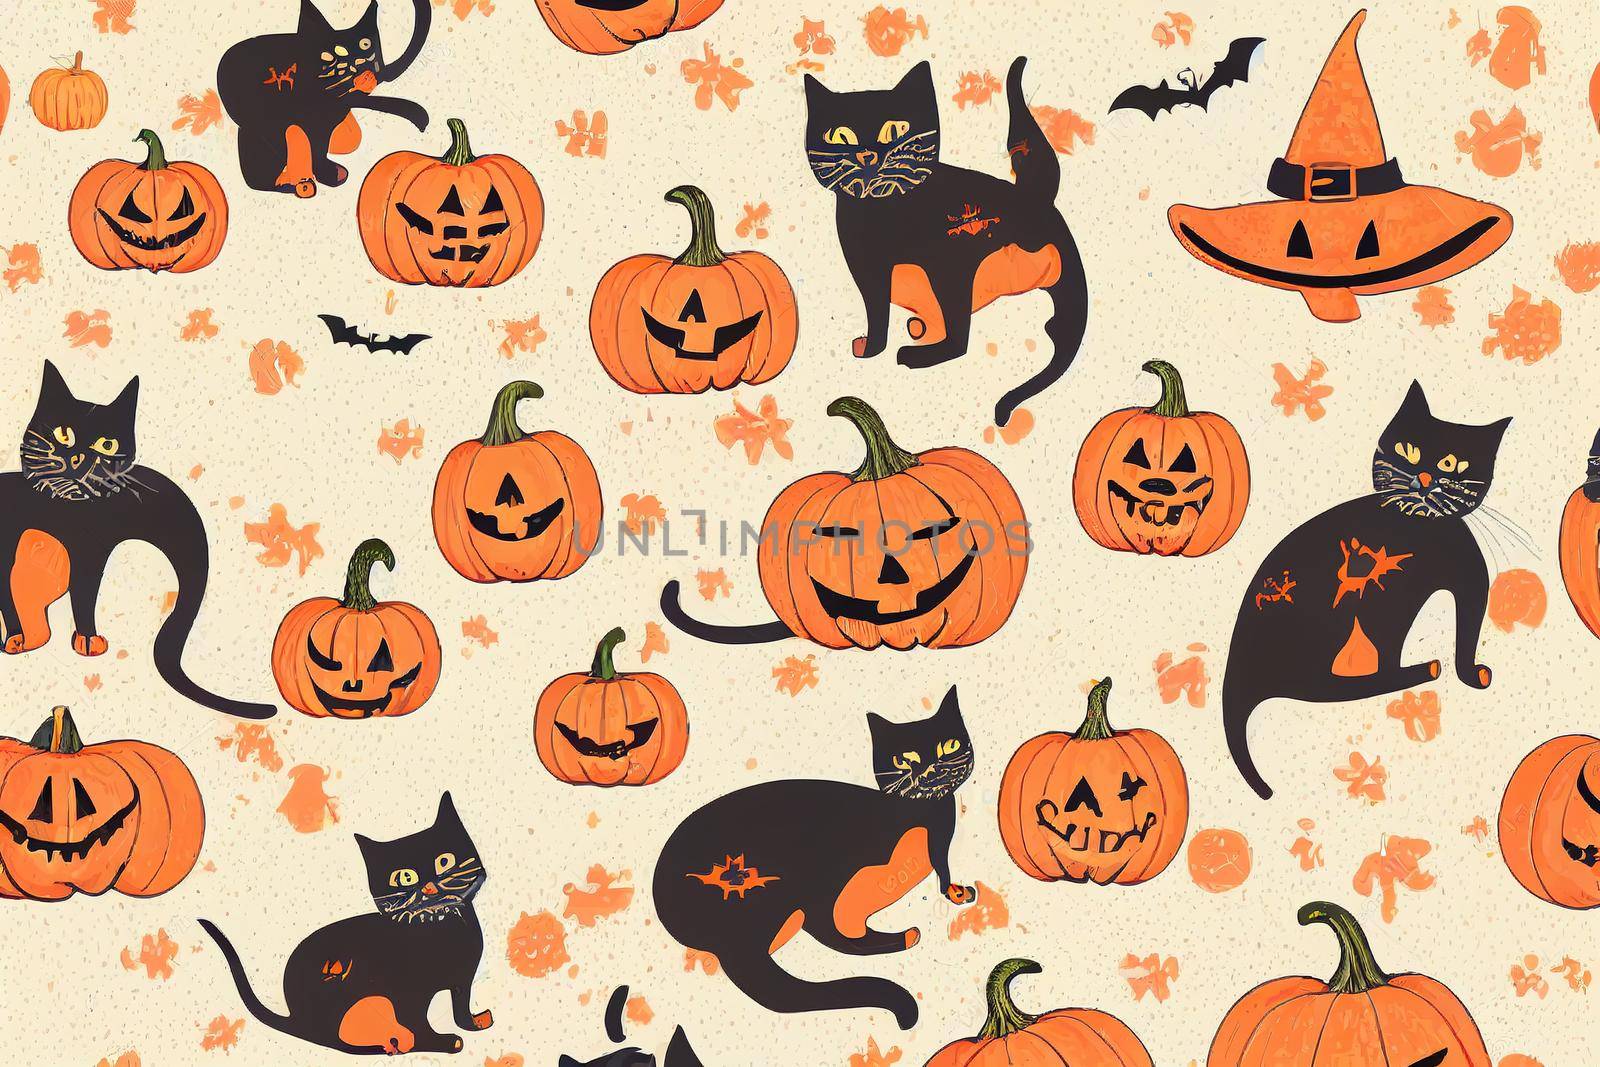 Fun hand drawn Halloween pattern with cats by 2ragon